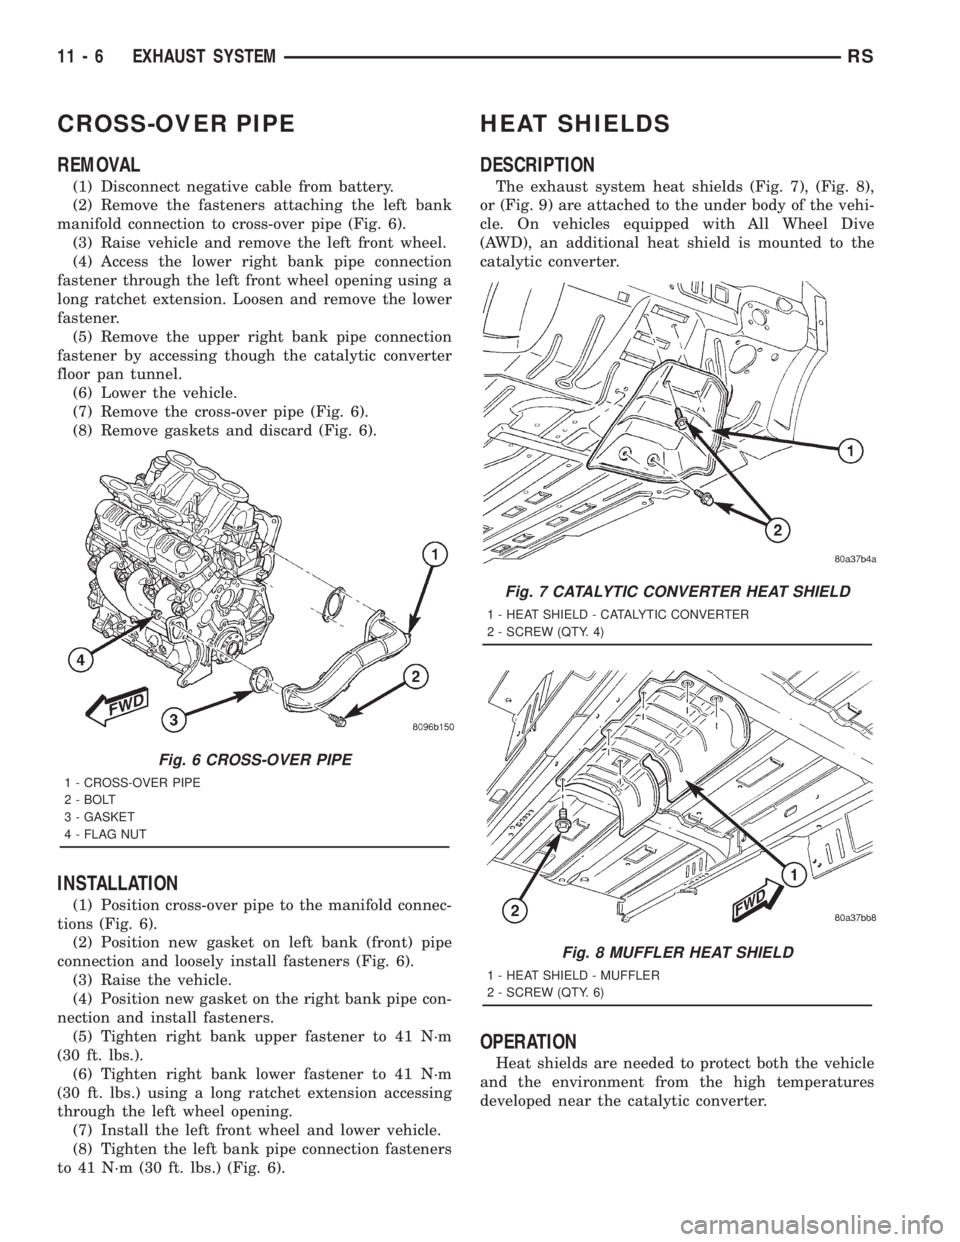 CHRYSLER VOYAGER 2001  Service Manual CROSS-OVER PIPE
REMOVAL
(1) Disconnect negative cable from battery.
(2) Remove the fasteners attaching the left bank
manifold connection to cross-over pipe (Fig. 6).
(3) Raise vehicle and remove the l